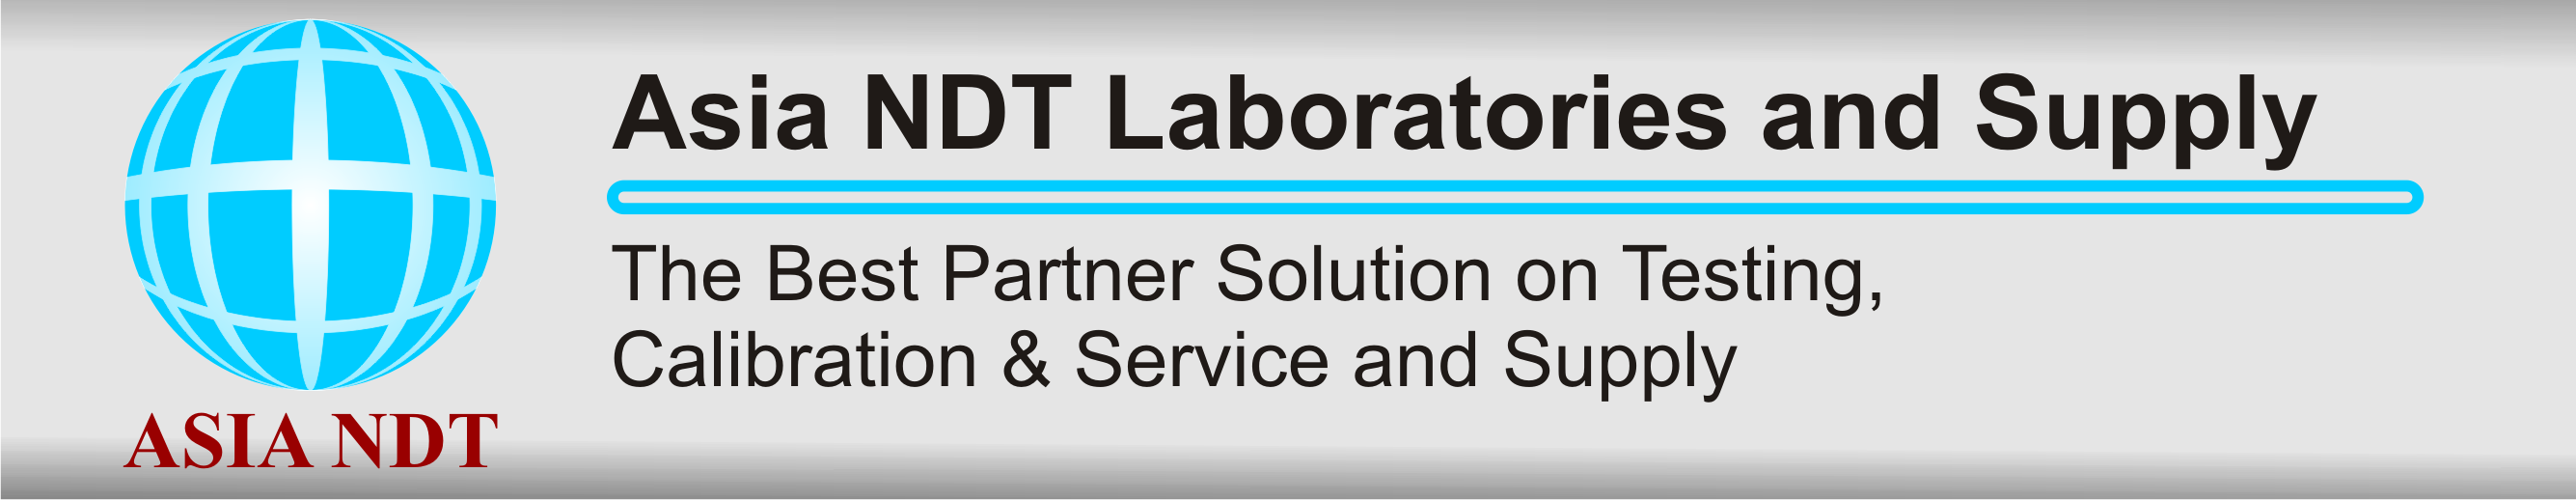 Asia NDT Laboratories and Supplies